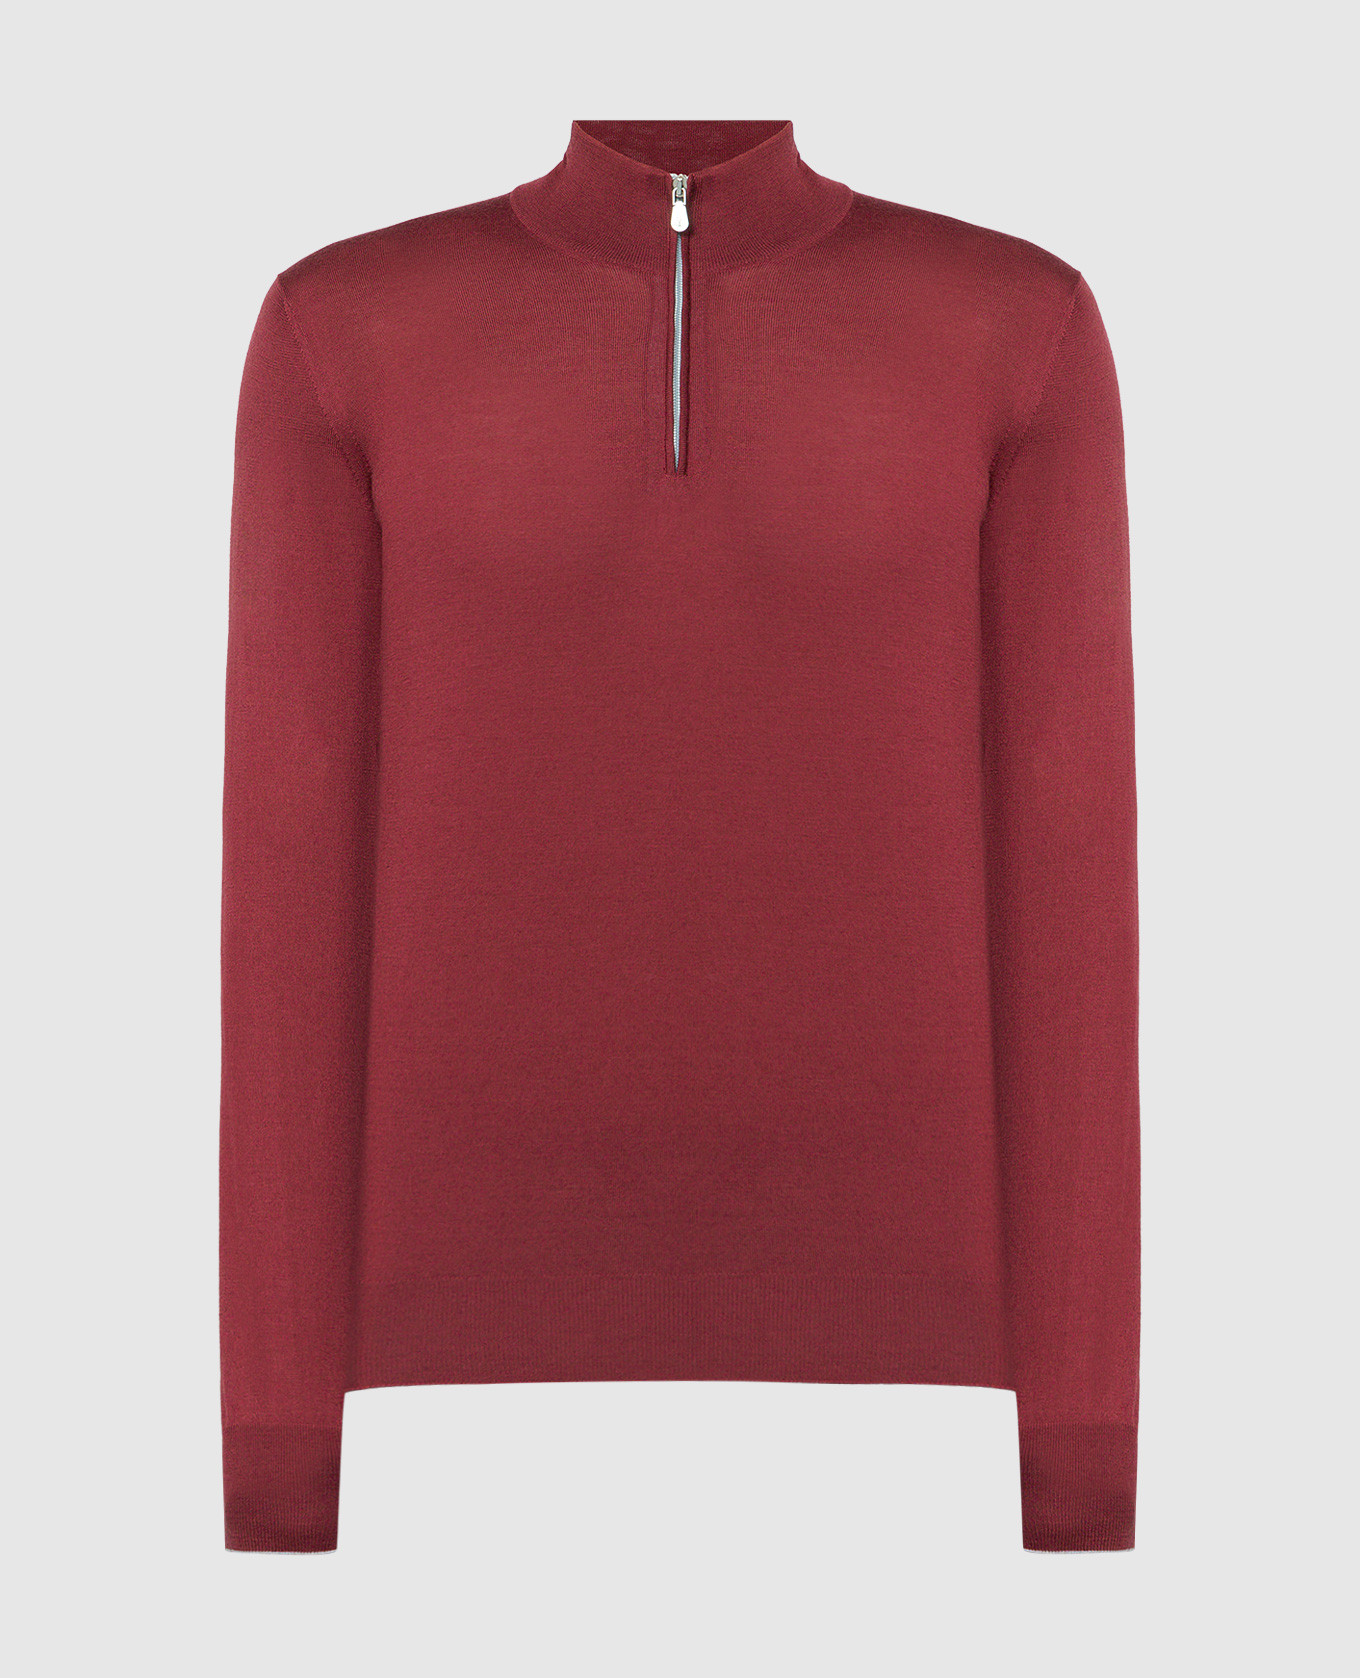 Burgundy wool and cashmere jumper